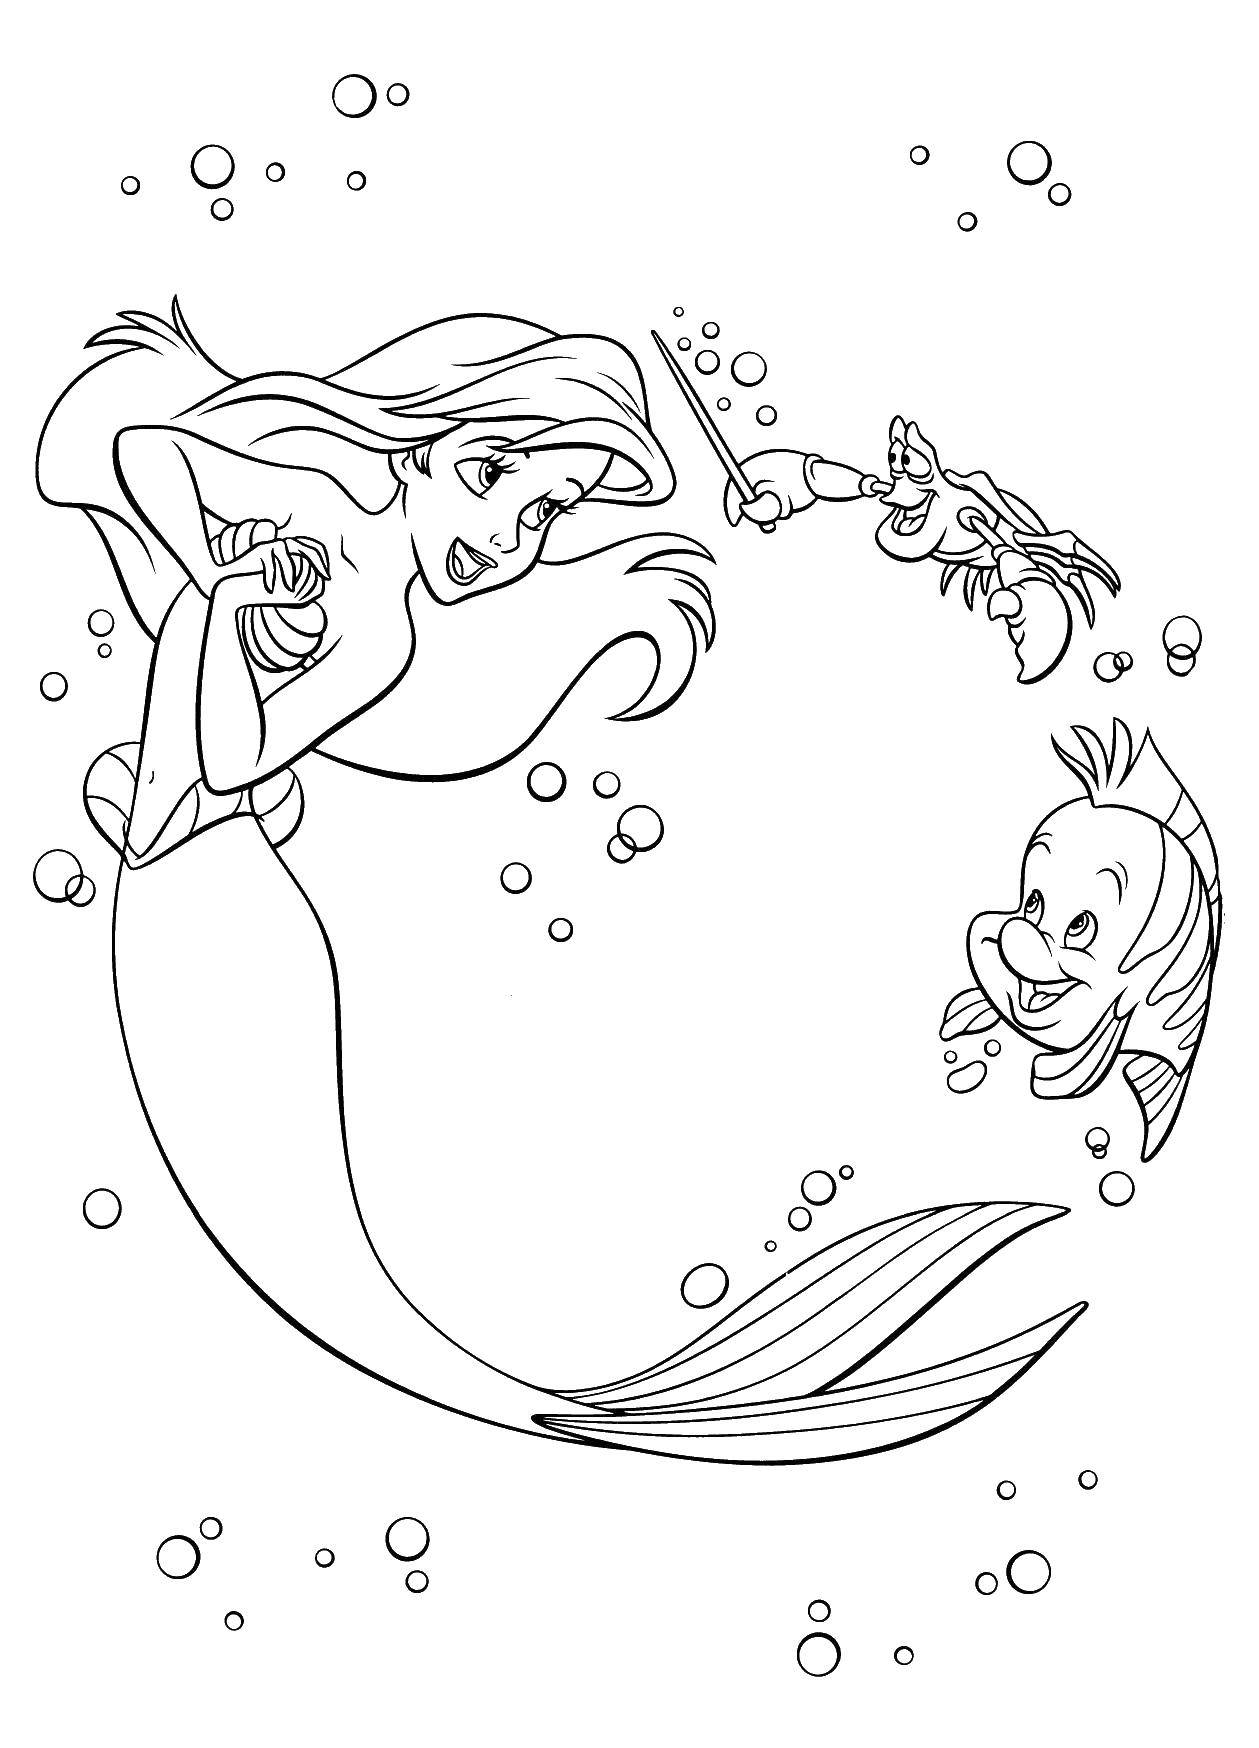 Coloring Game friends under water. Category Disney cartoons. Tags:  Disney, the little mermaid, Ariel.